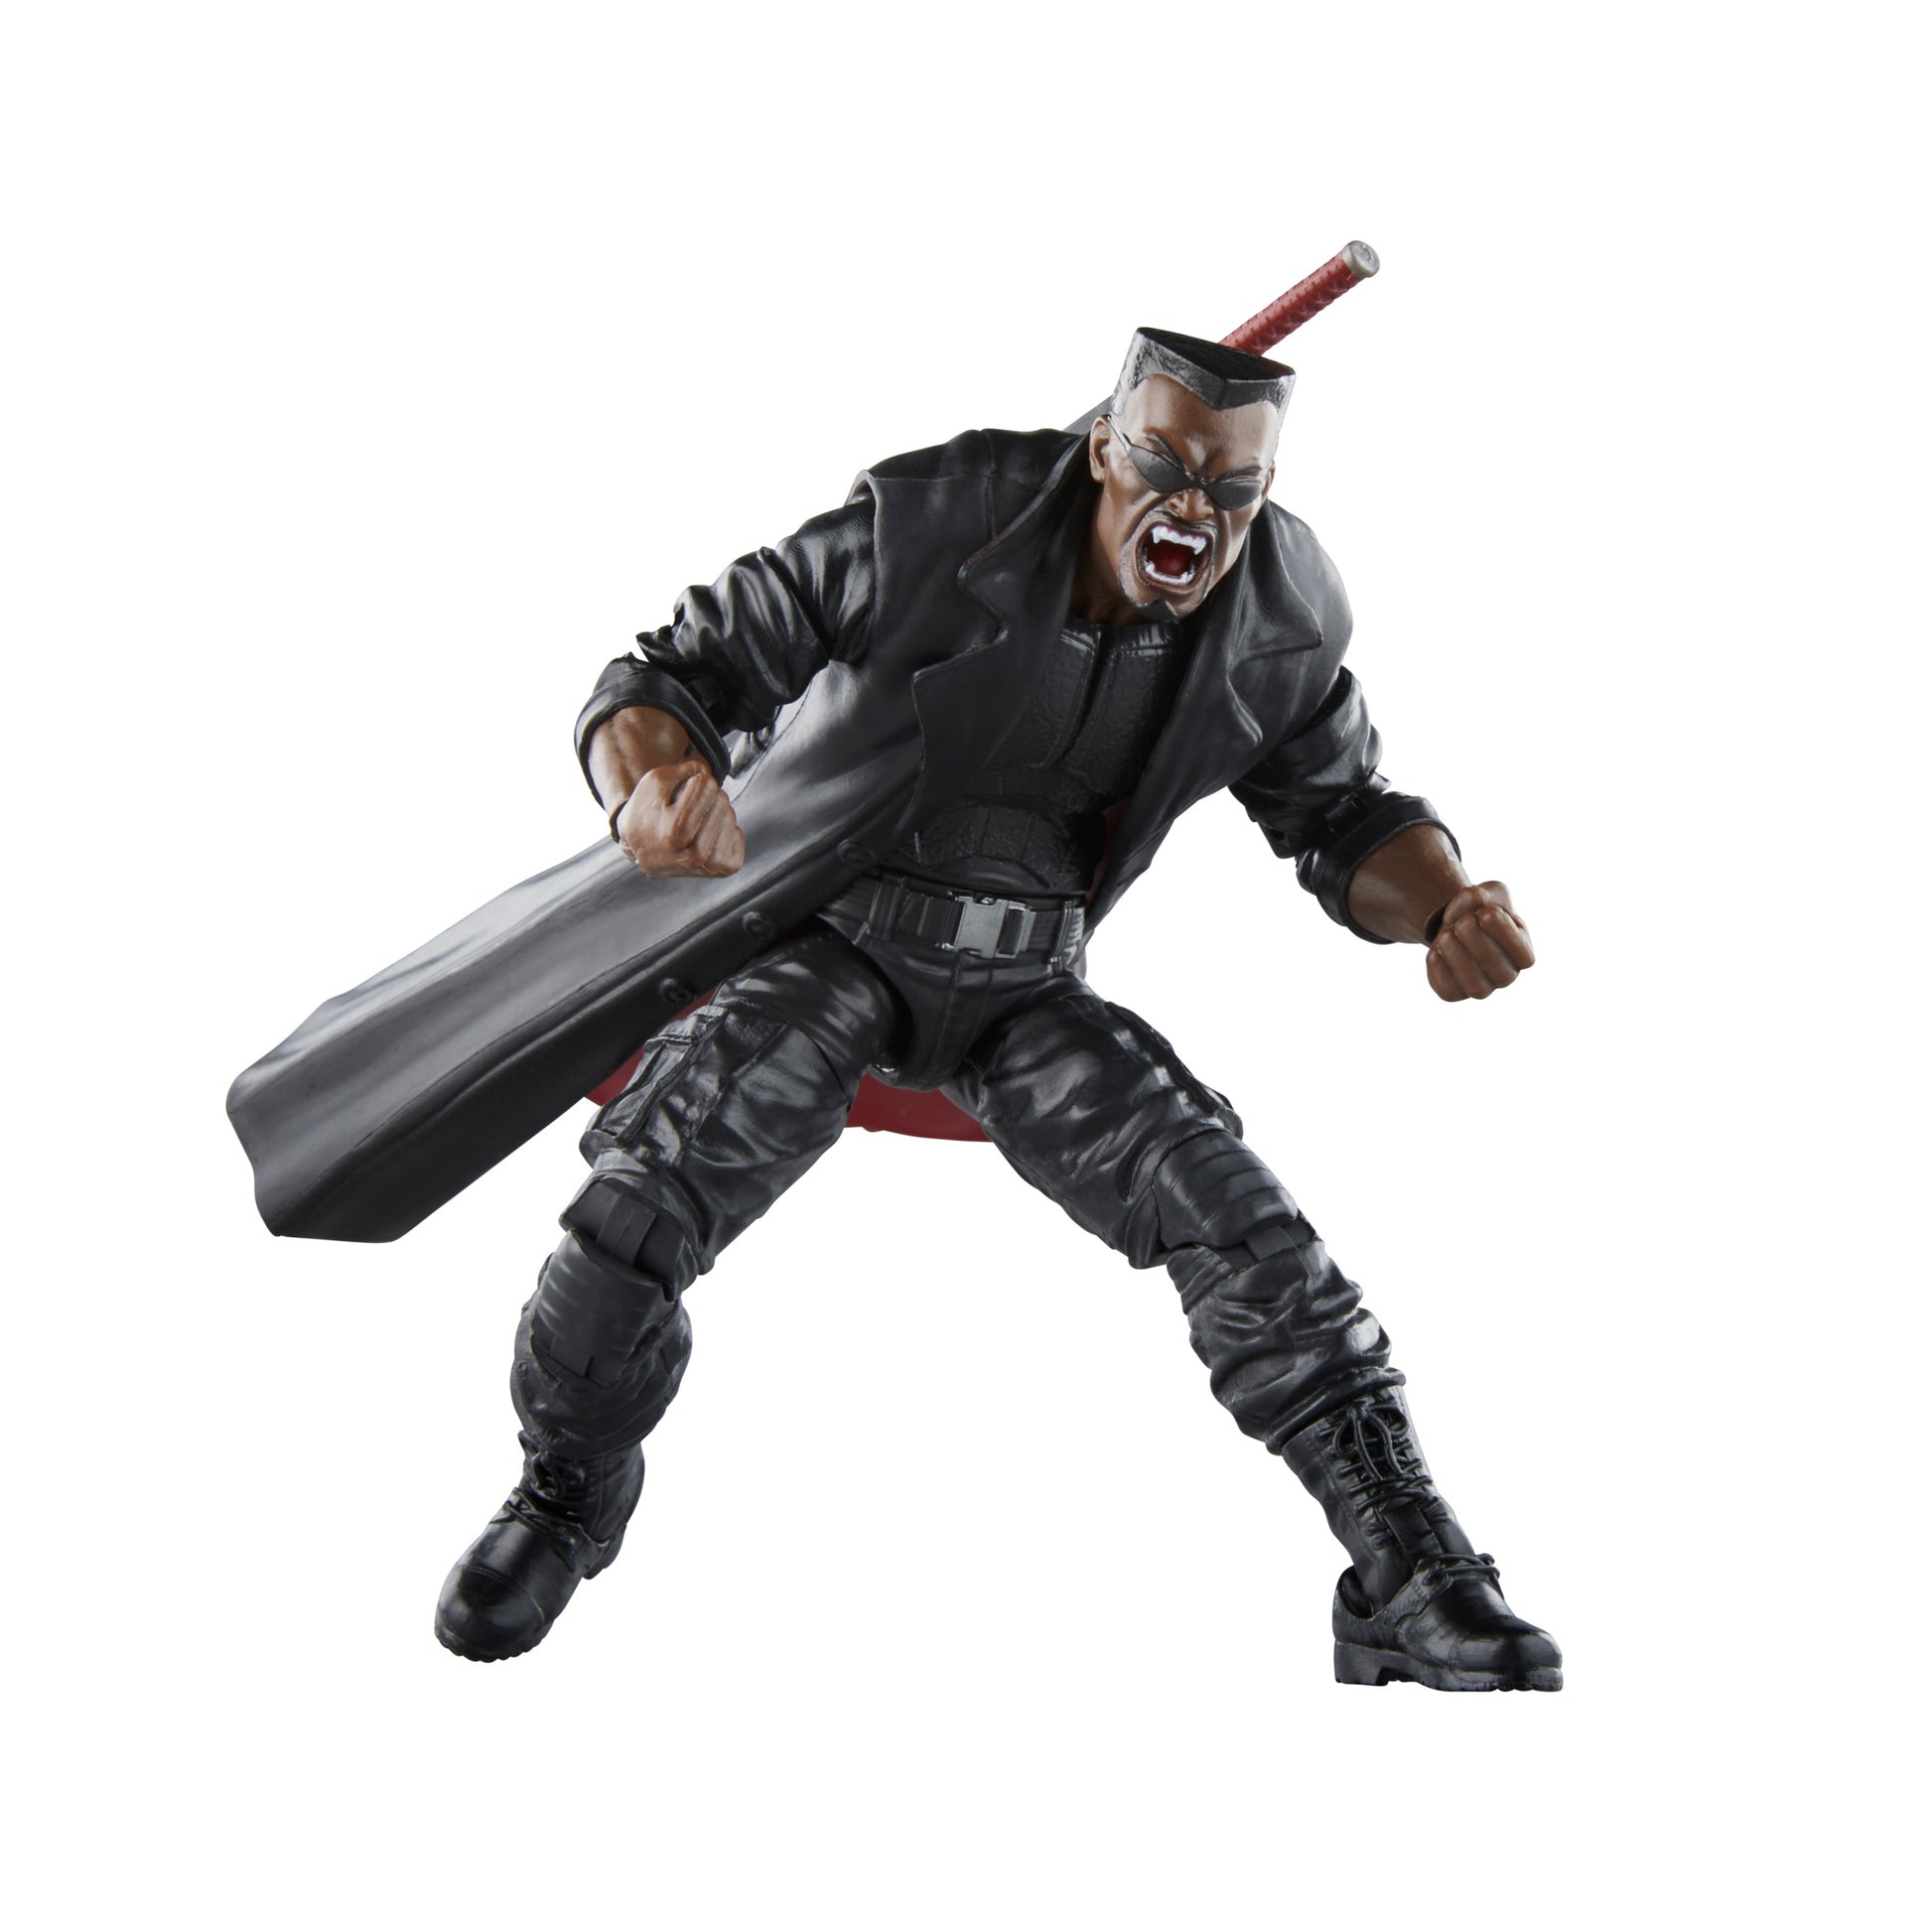 Hasbro Marvel Legends Series Marvel's Blade Action Figure Toy angry pose - Heretoserveyou